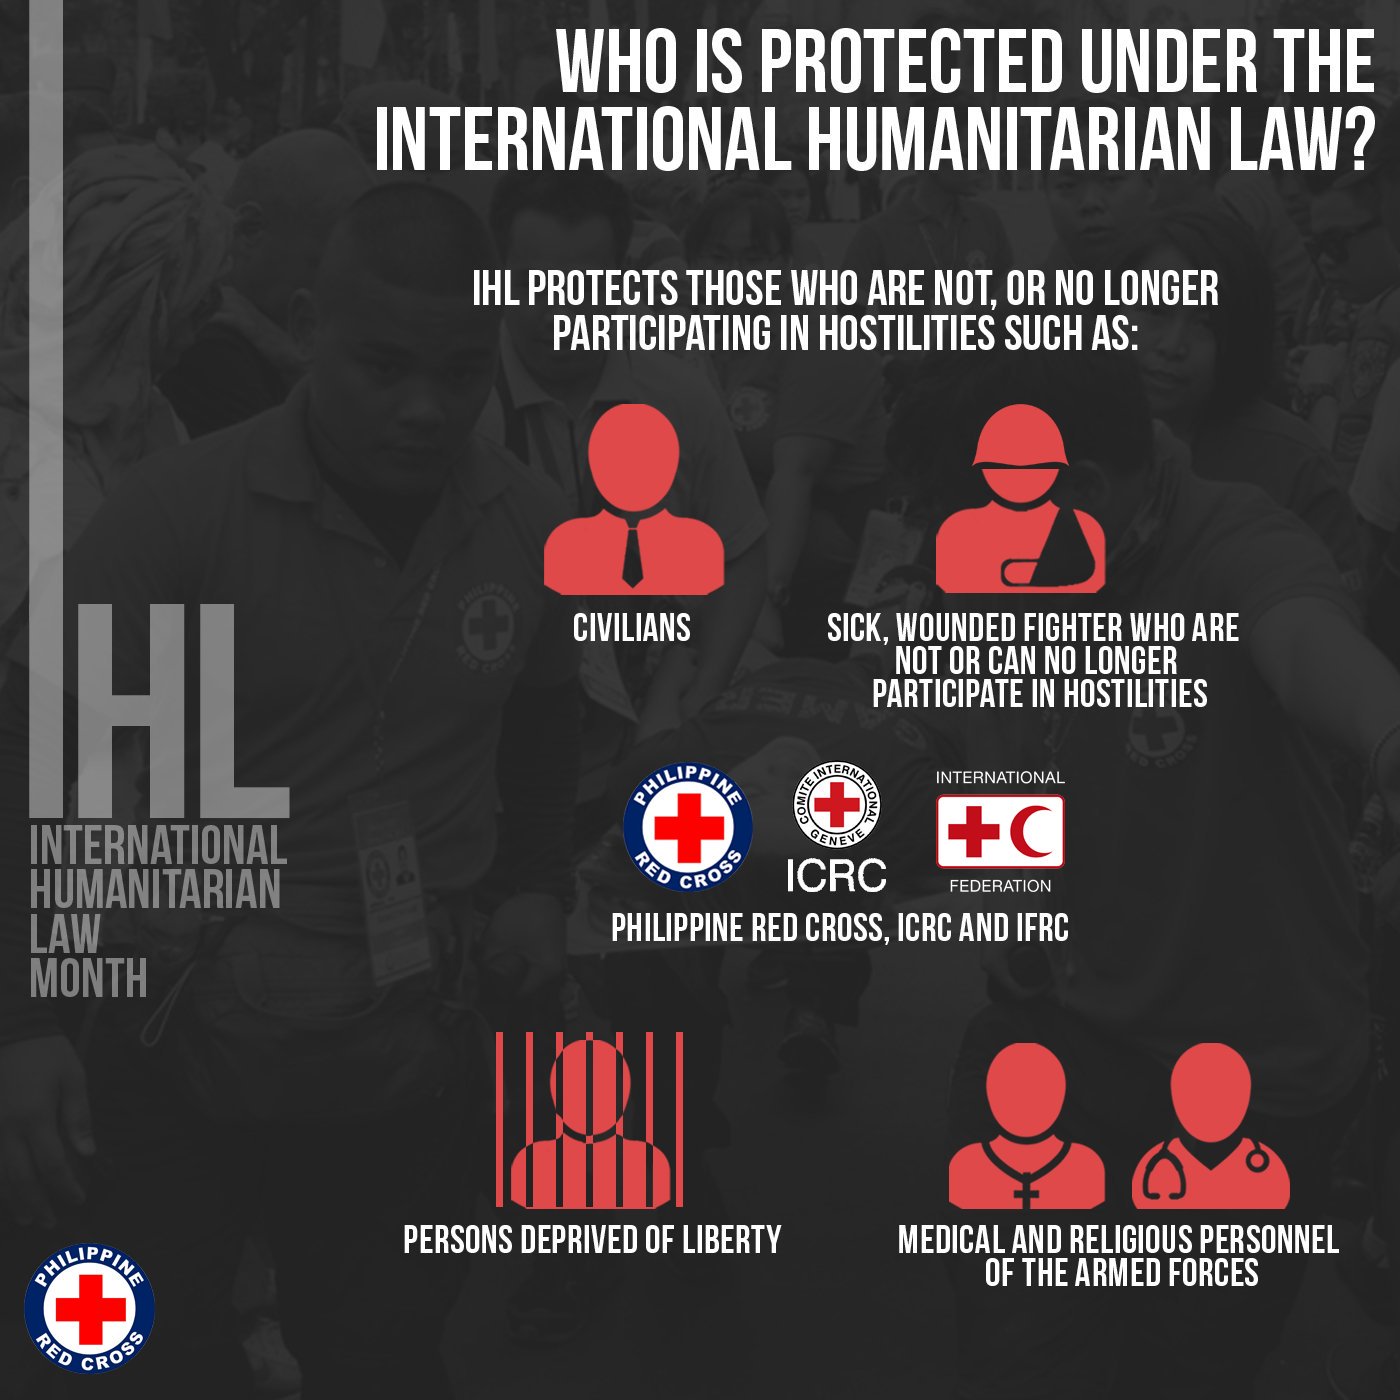 Philippine Red Cross on Twitter: wars have limits. International Humanitarian Law covers persons who are not—or no longer—participating hostilities. All civilians including wounded and sick medical and religious military